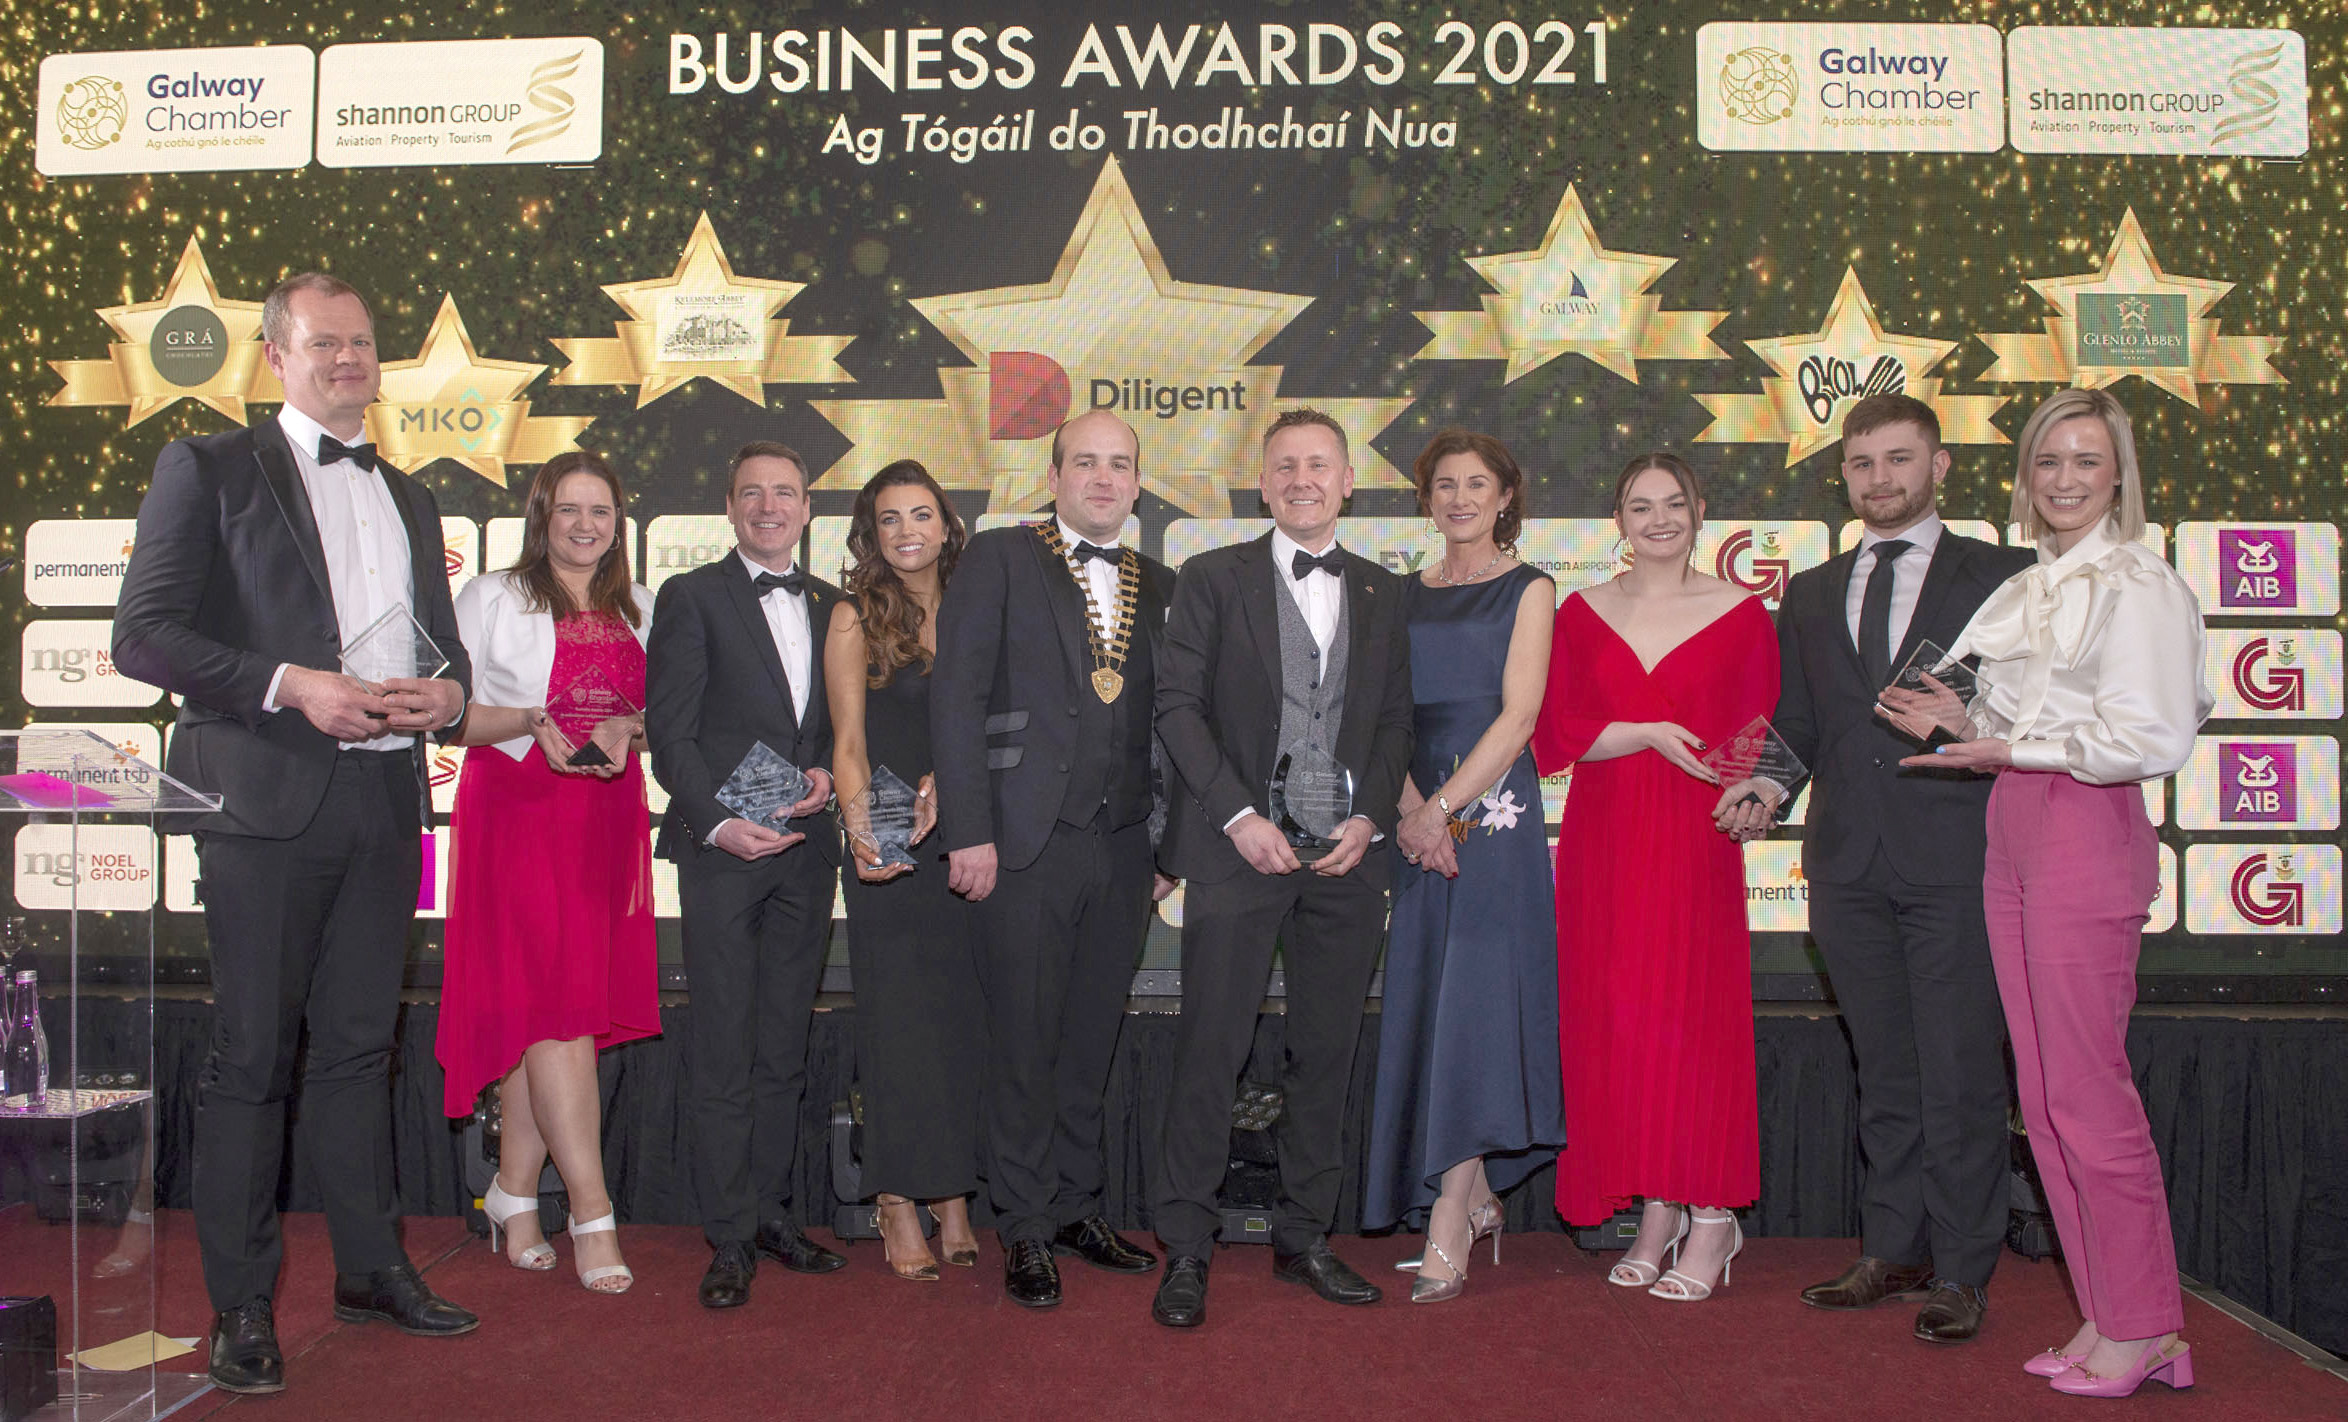 Award winners Conor Coyne, Kylemore Abbey, Regina Madden, MKO, Dan Murphy, Galway Bay Hotel, Leanne McCafferty, Glenloe Abbey, Aengus Burns, President, Galway Chamber, Mark Tiernan, Diligent, Mary Considine, Shannon Group (main sponsors), Eibhlin O'Riordan and Brandon Blacoe, ByoWave and Gráinne Mullins, Grá Chocolates pictured at the Galway Chamber Business Awards in the Salthill Hotel.
Photo : Murtography